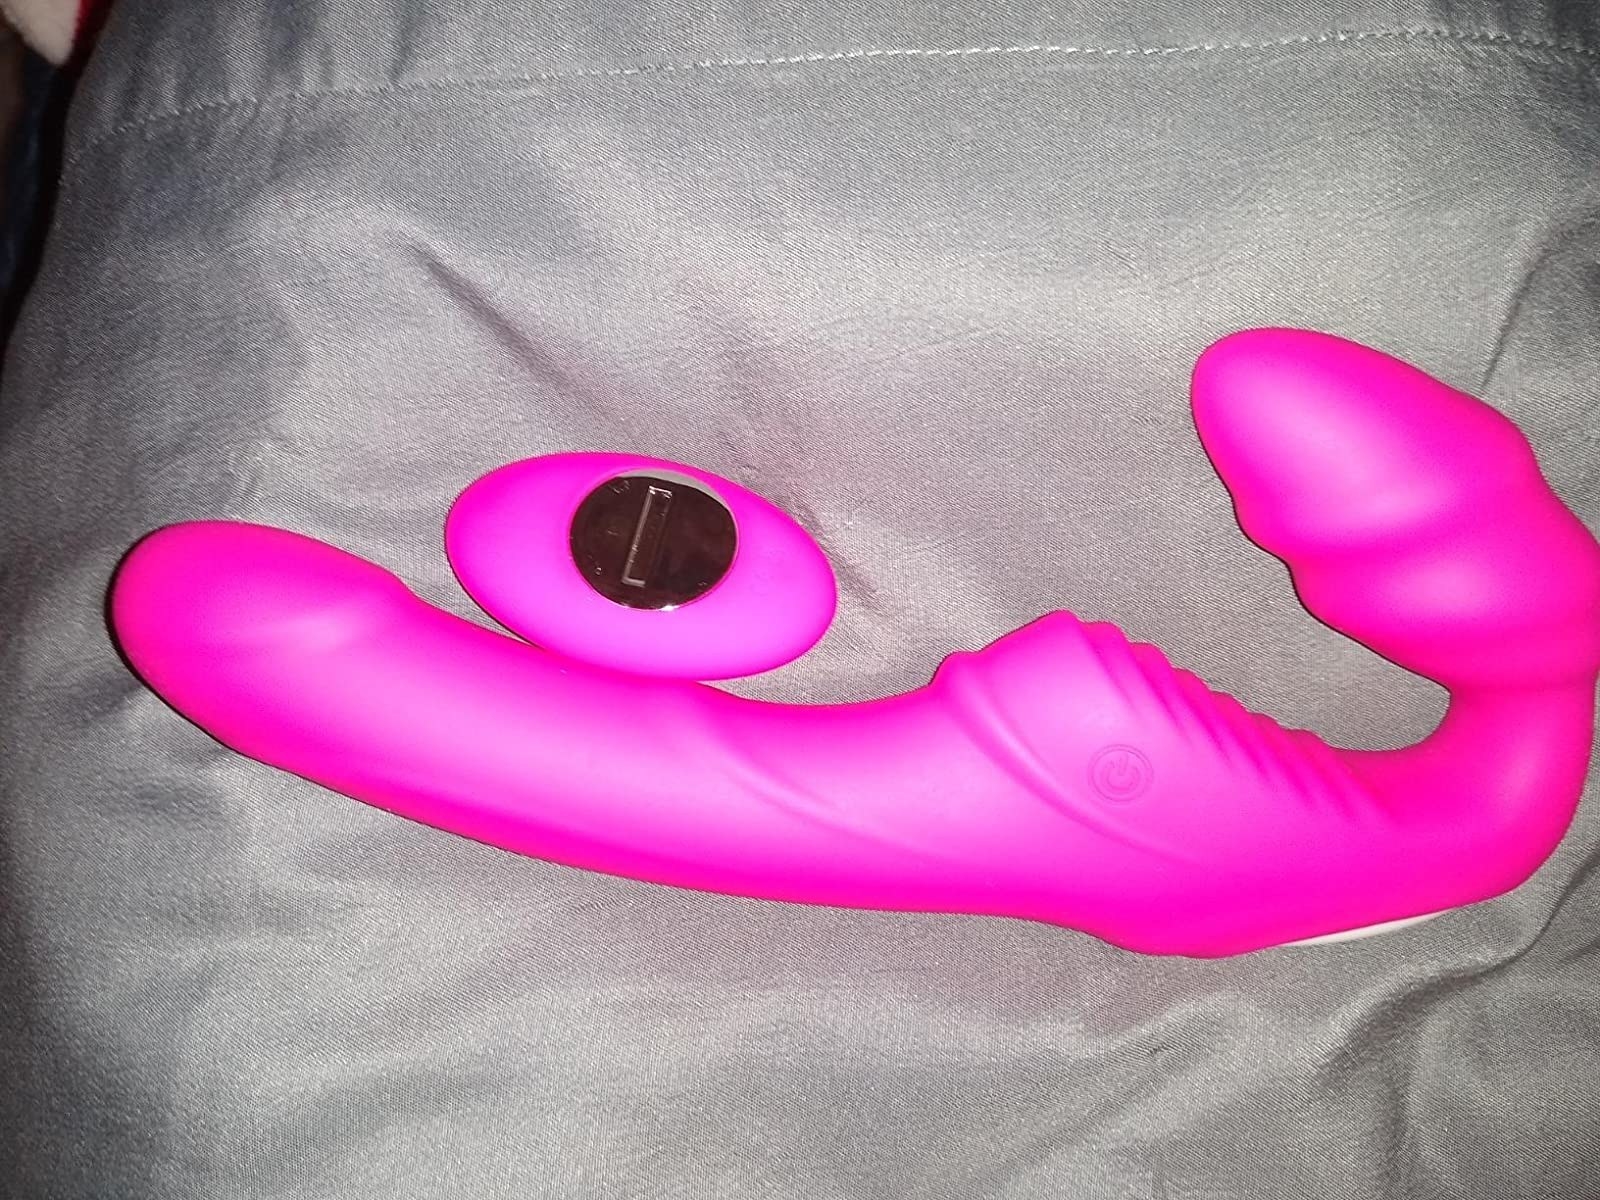 Pink dual-ended strap-on with wireless remote